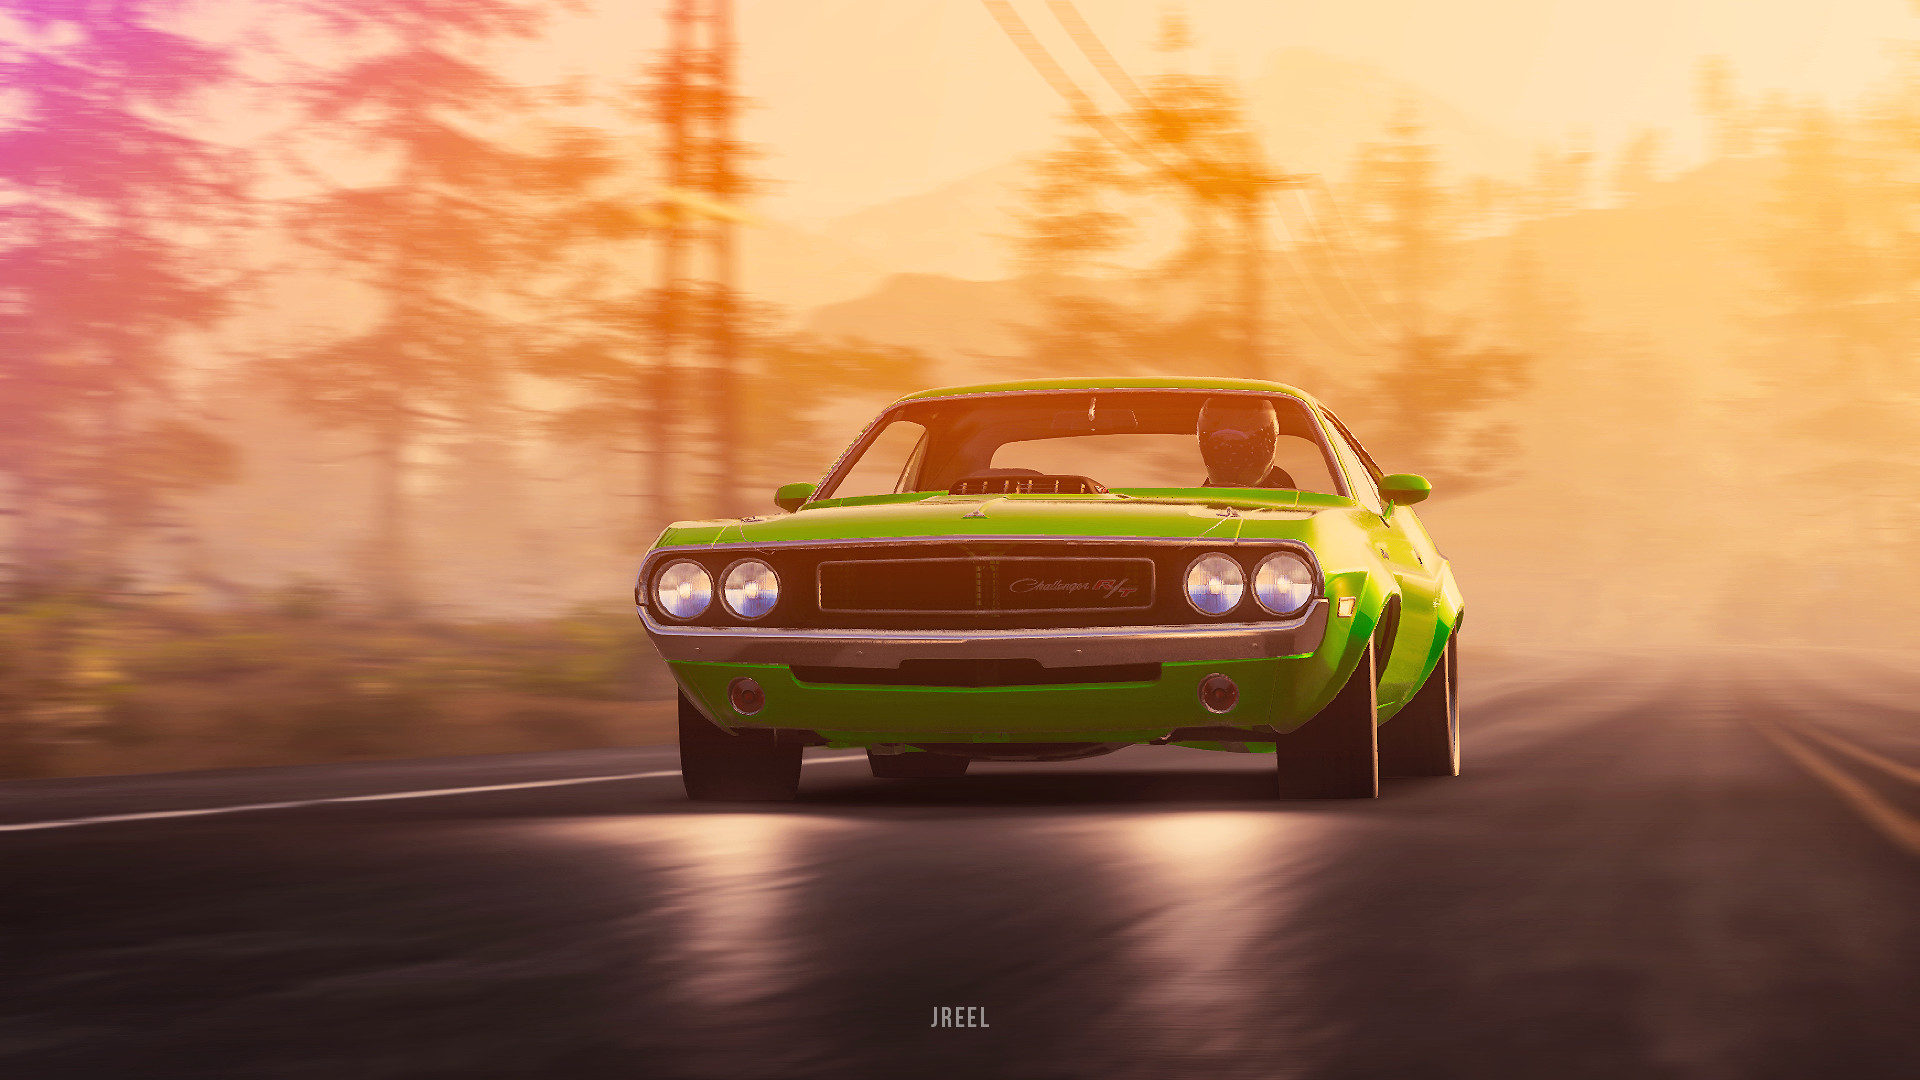 video game, the crew 2, dodge challenger, dodge, green car